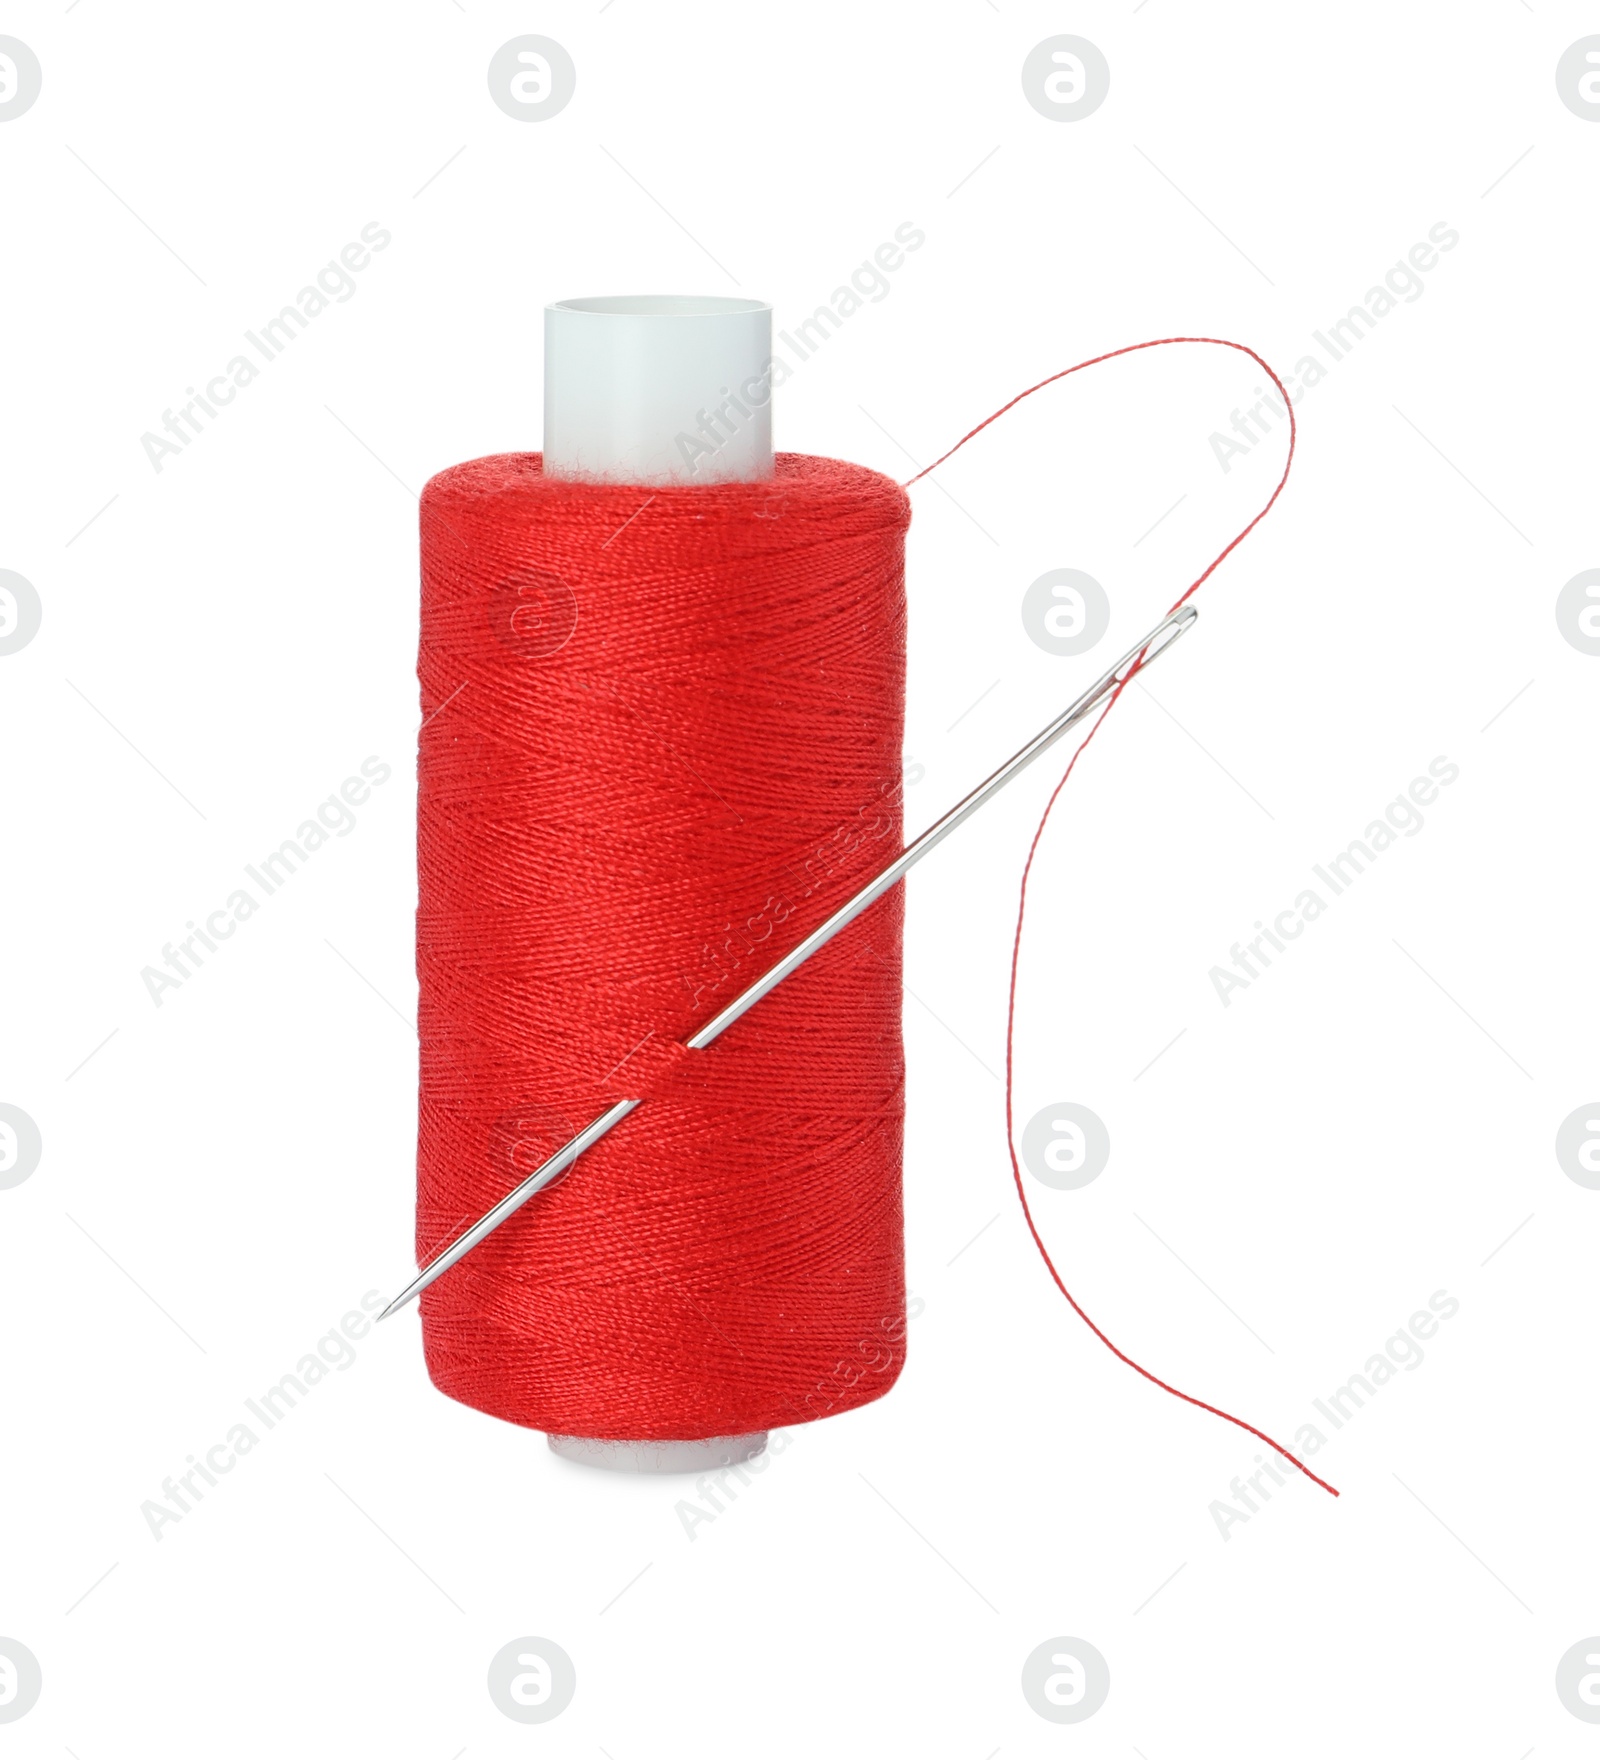 Photo of Spool of red sewing thread with needle isolated on white